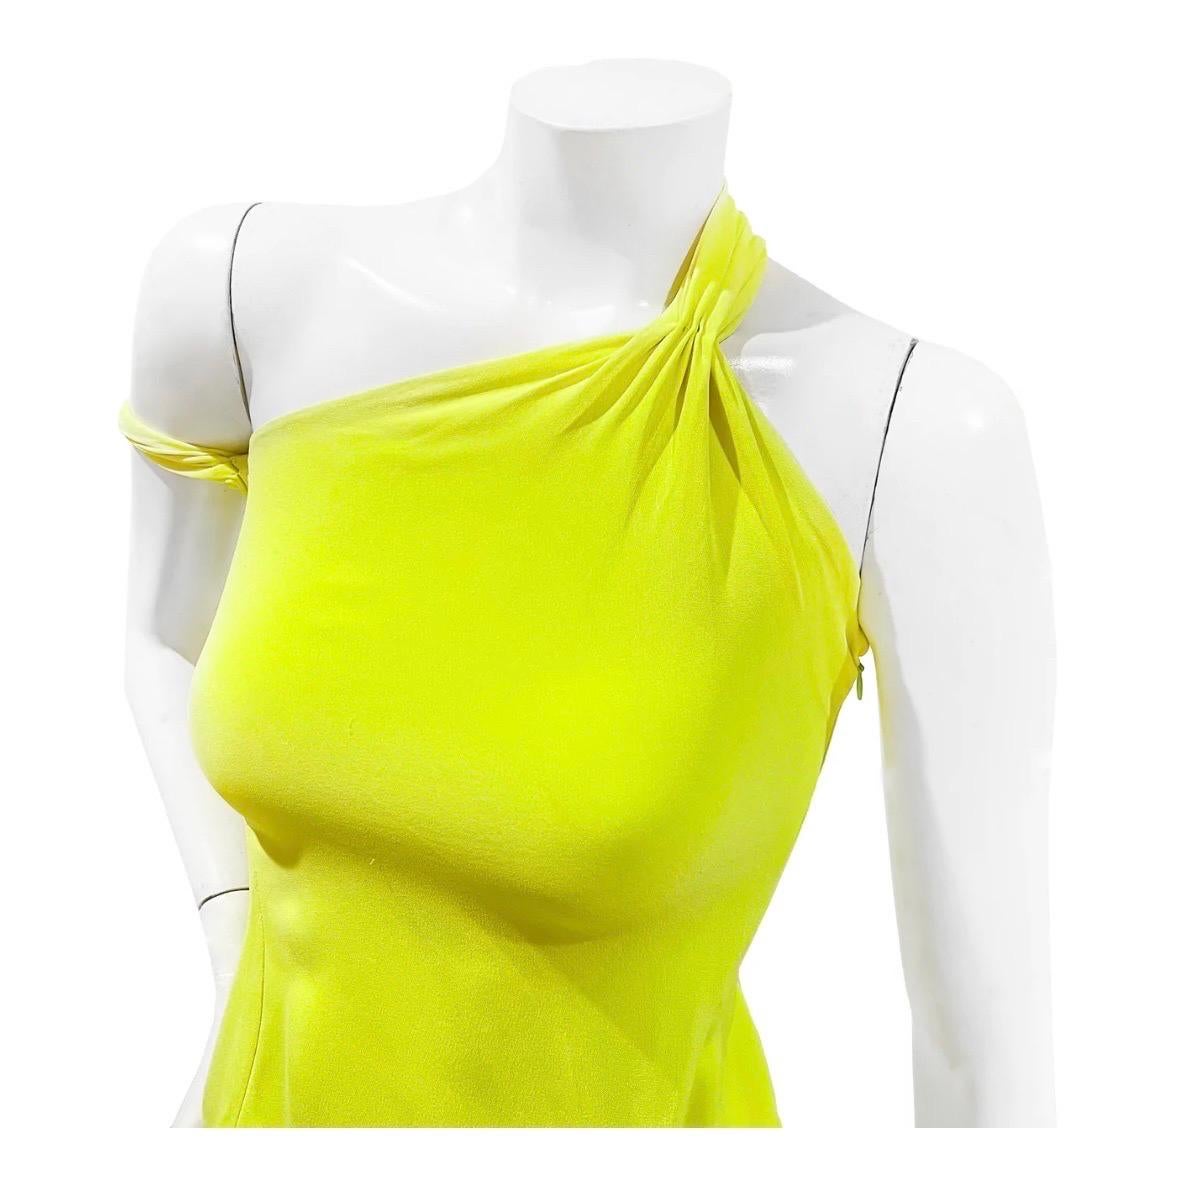 Vintage Yellow Neon Halter Dress by Gianni Versace
Fall / Winter 2002
Made in Italy 
Bright yellow neon
Bottom layer ruffle hem detail 
Sleeveless
Halter style dress
Side invisible zip and clasp closure
One shoulder style strap
Extra fabric detail